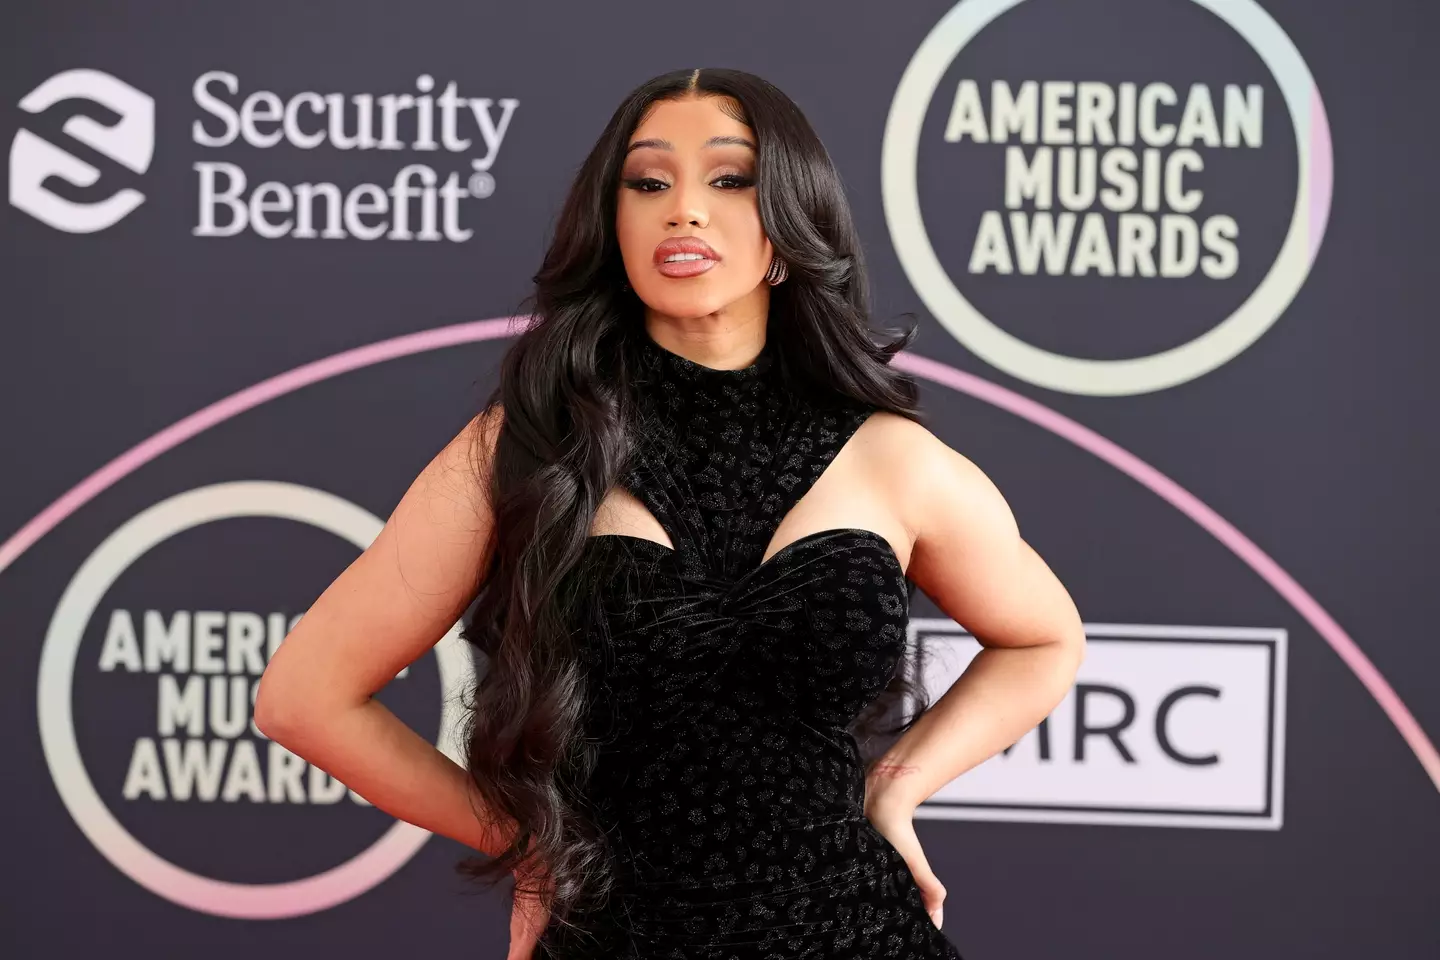 Cardi B seemingly wanted to tell the world what she really feels towards her former partner, rapper Offset.